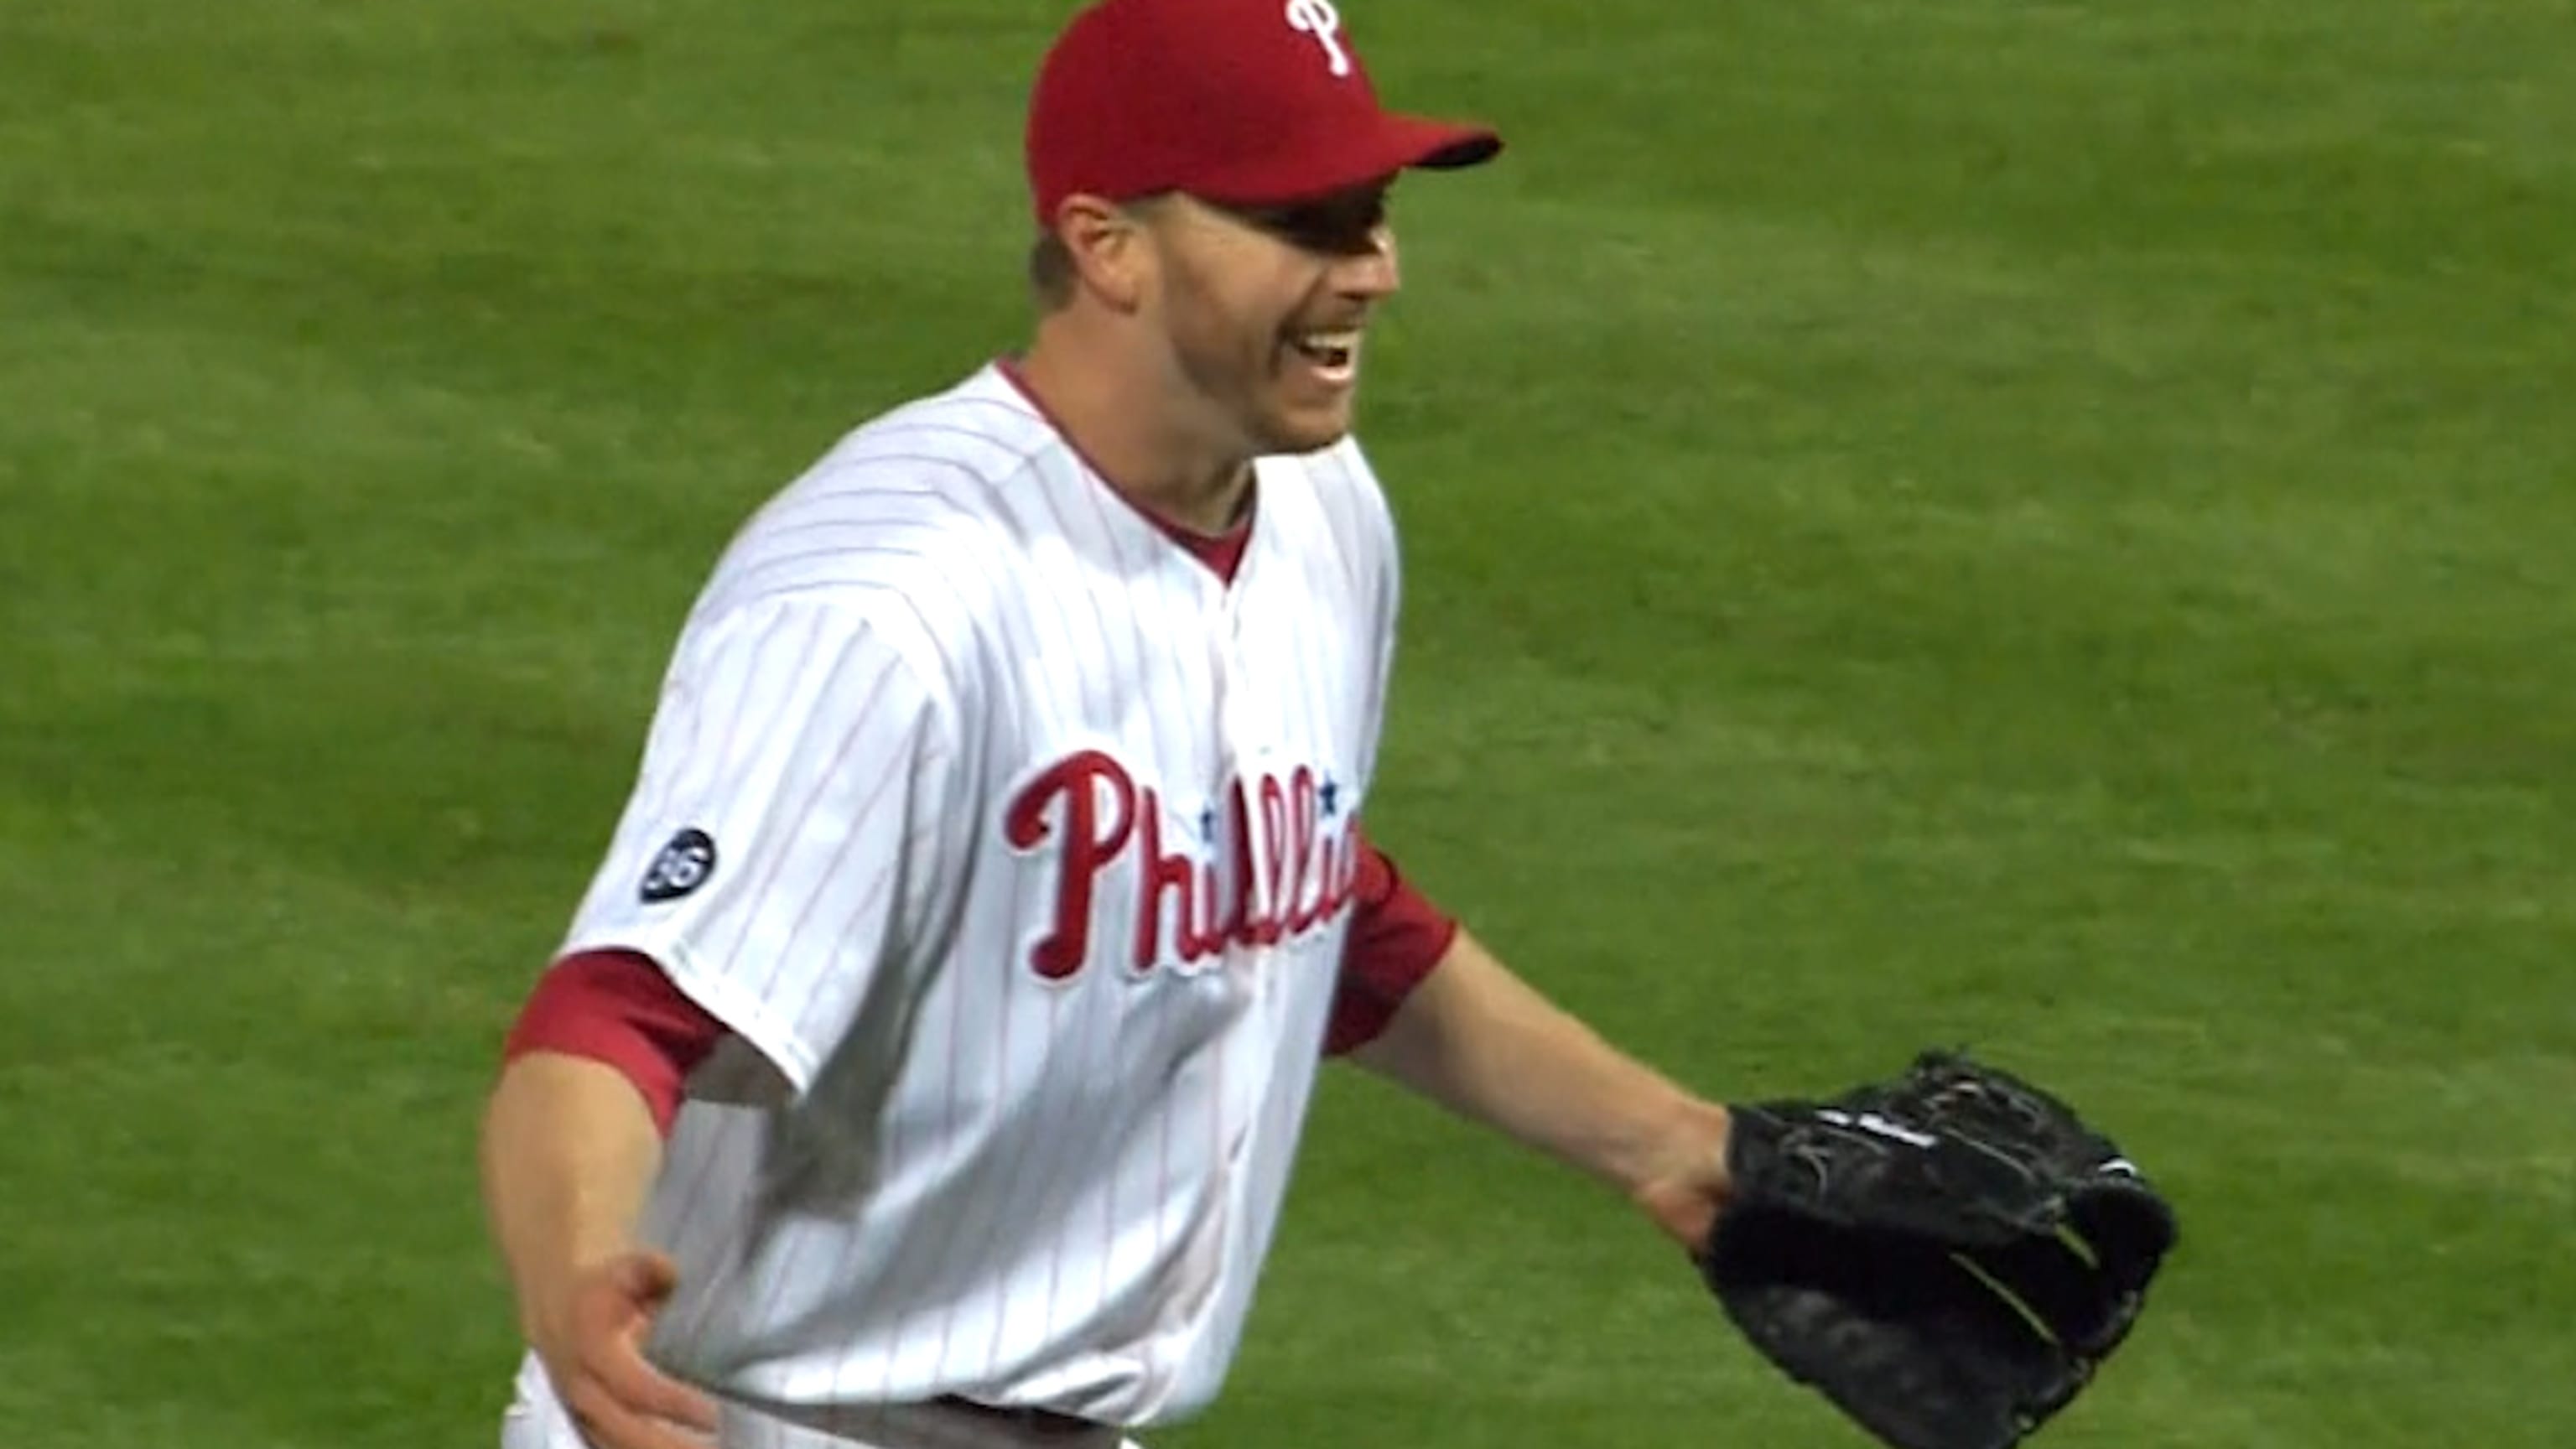 Roy Halladay pitches no-hitter as Phillies beat Reds in MLB play-offs, MLB